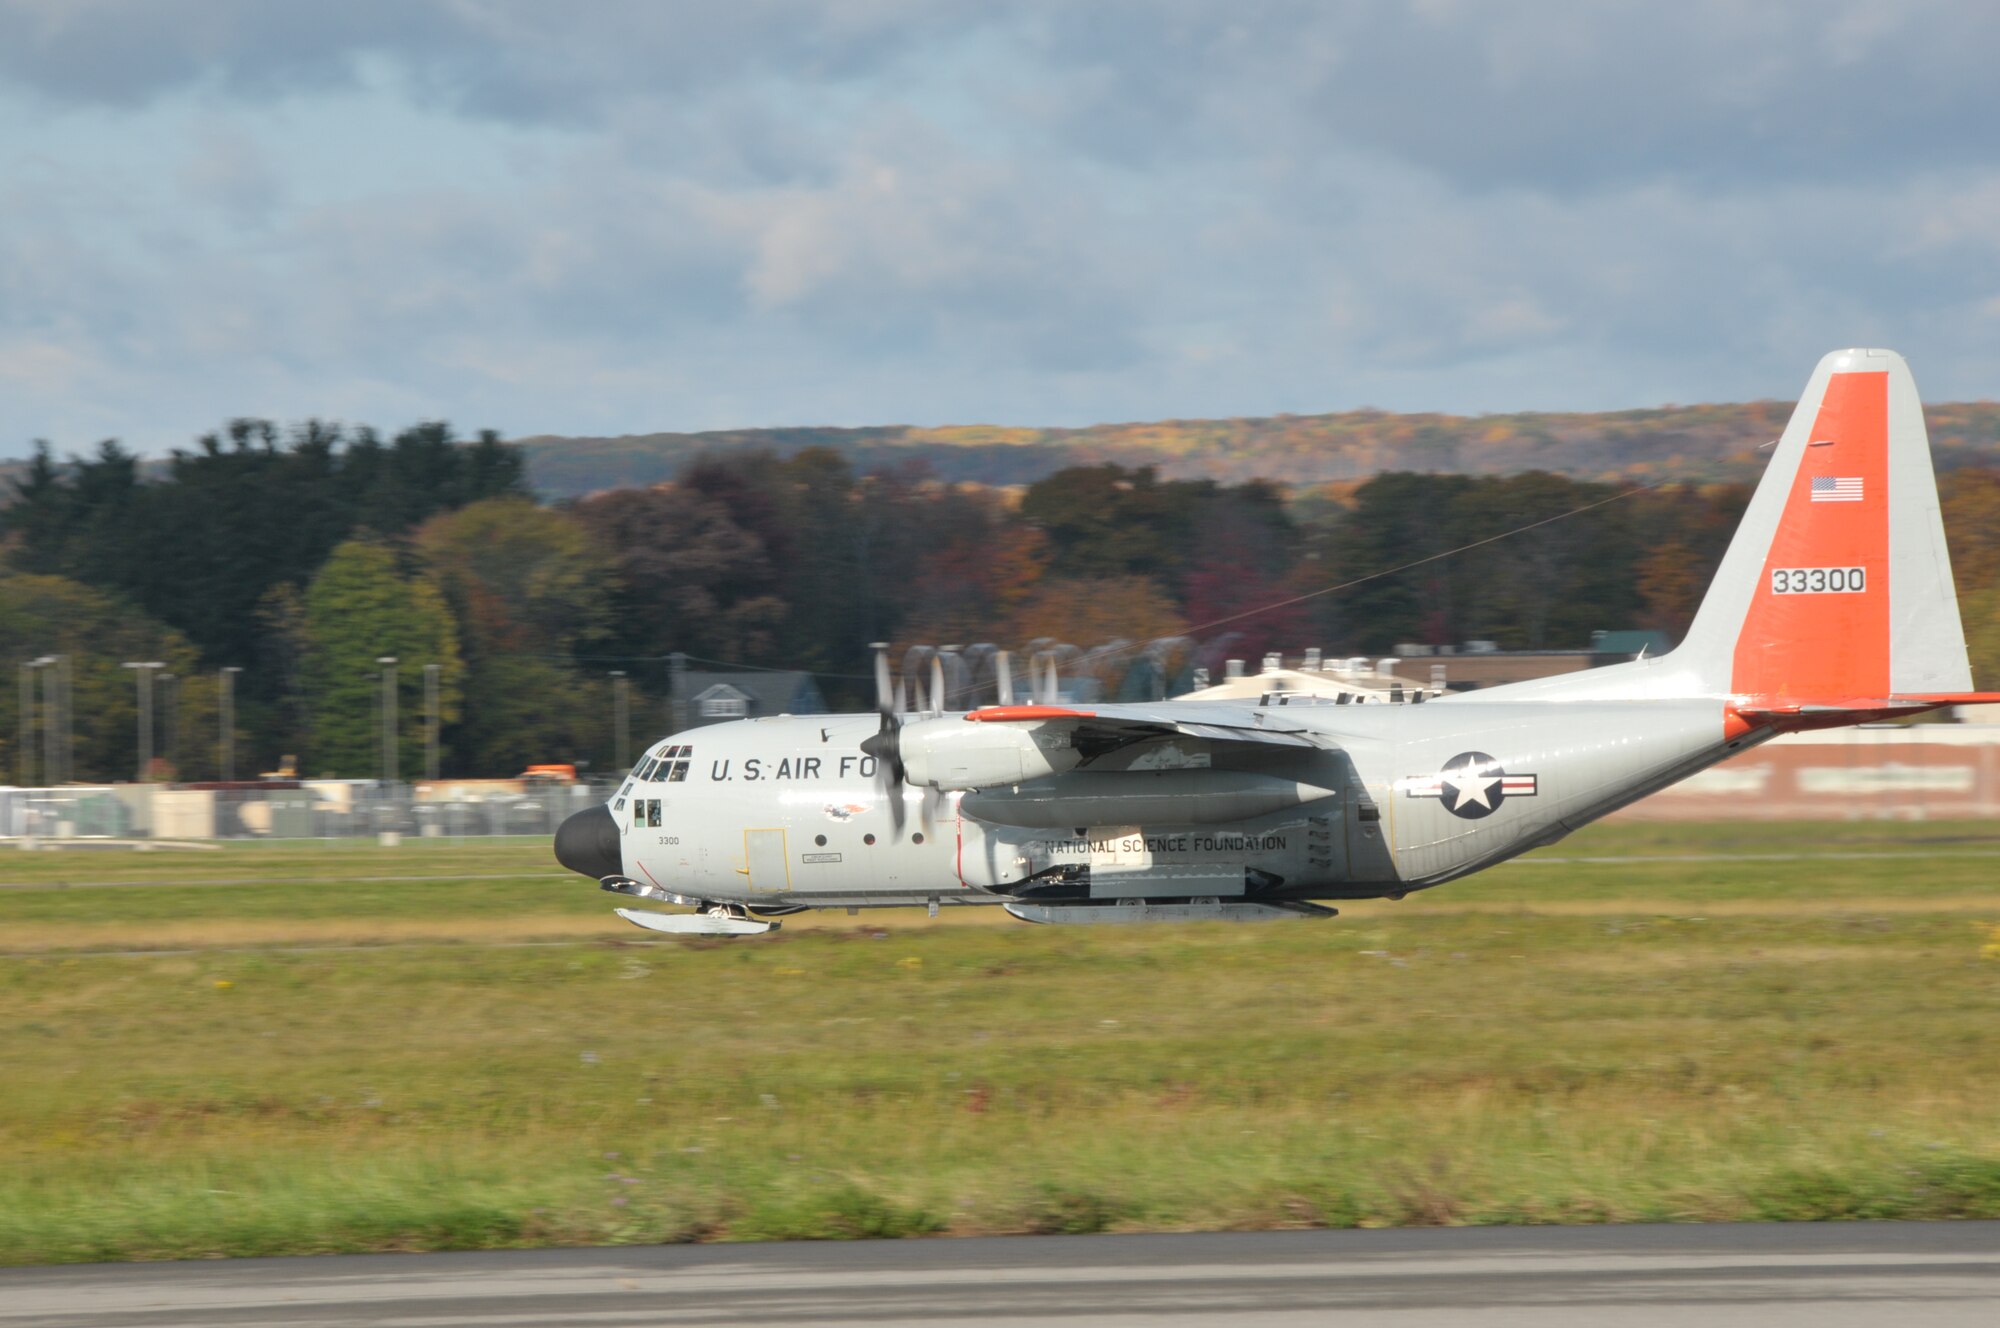 SCOTIA, NY -  An LC-130 aircraft bound for Antarctica in support of Operation DEEP FREEZE takes off from Stratton Air National Guard Base Oct. 18, 2013. (Air National Guard photo by Master Sgt. William M. Gizara/Released)